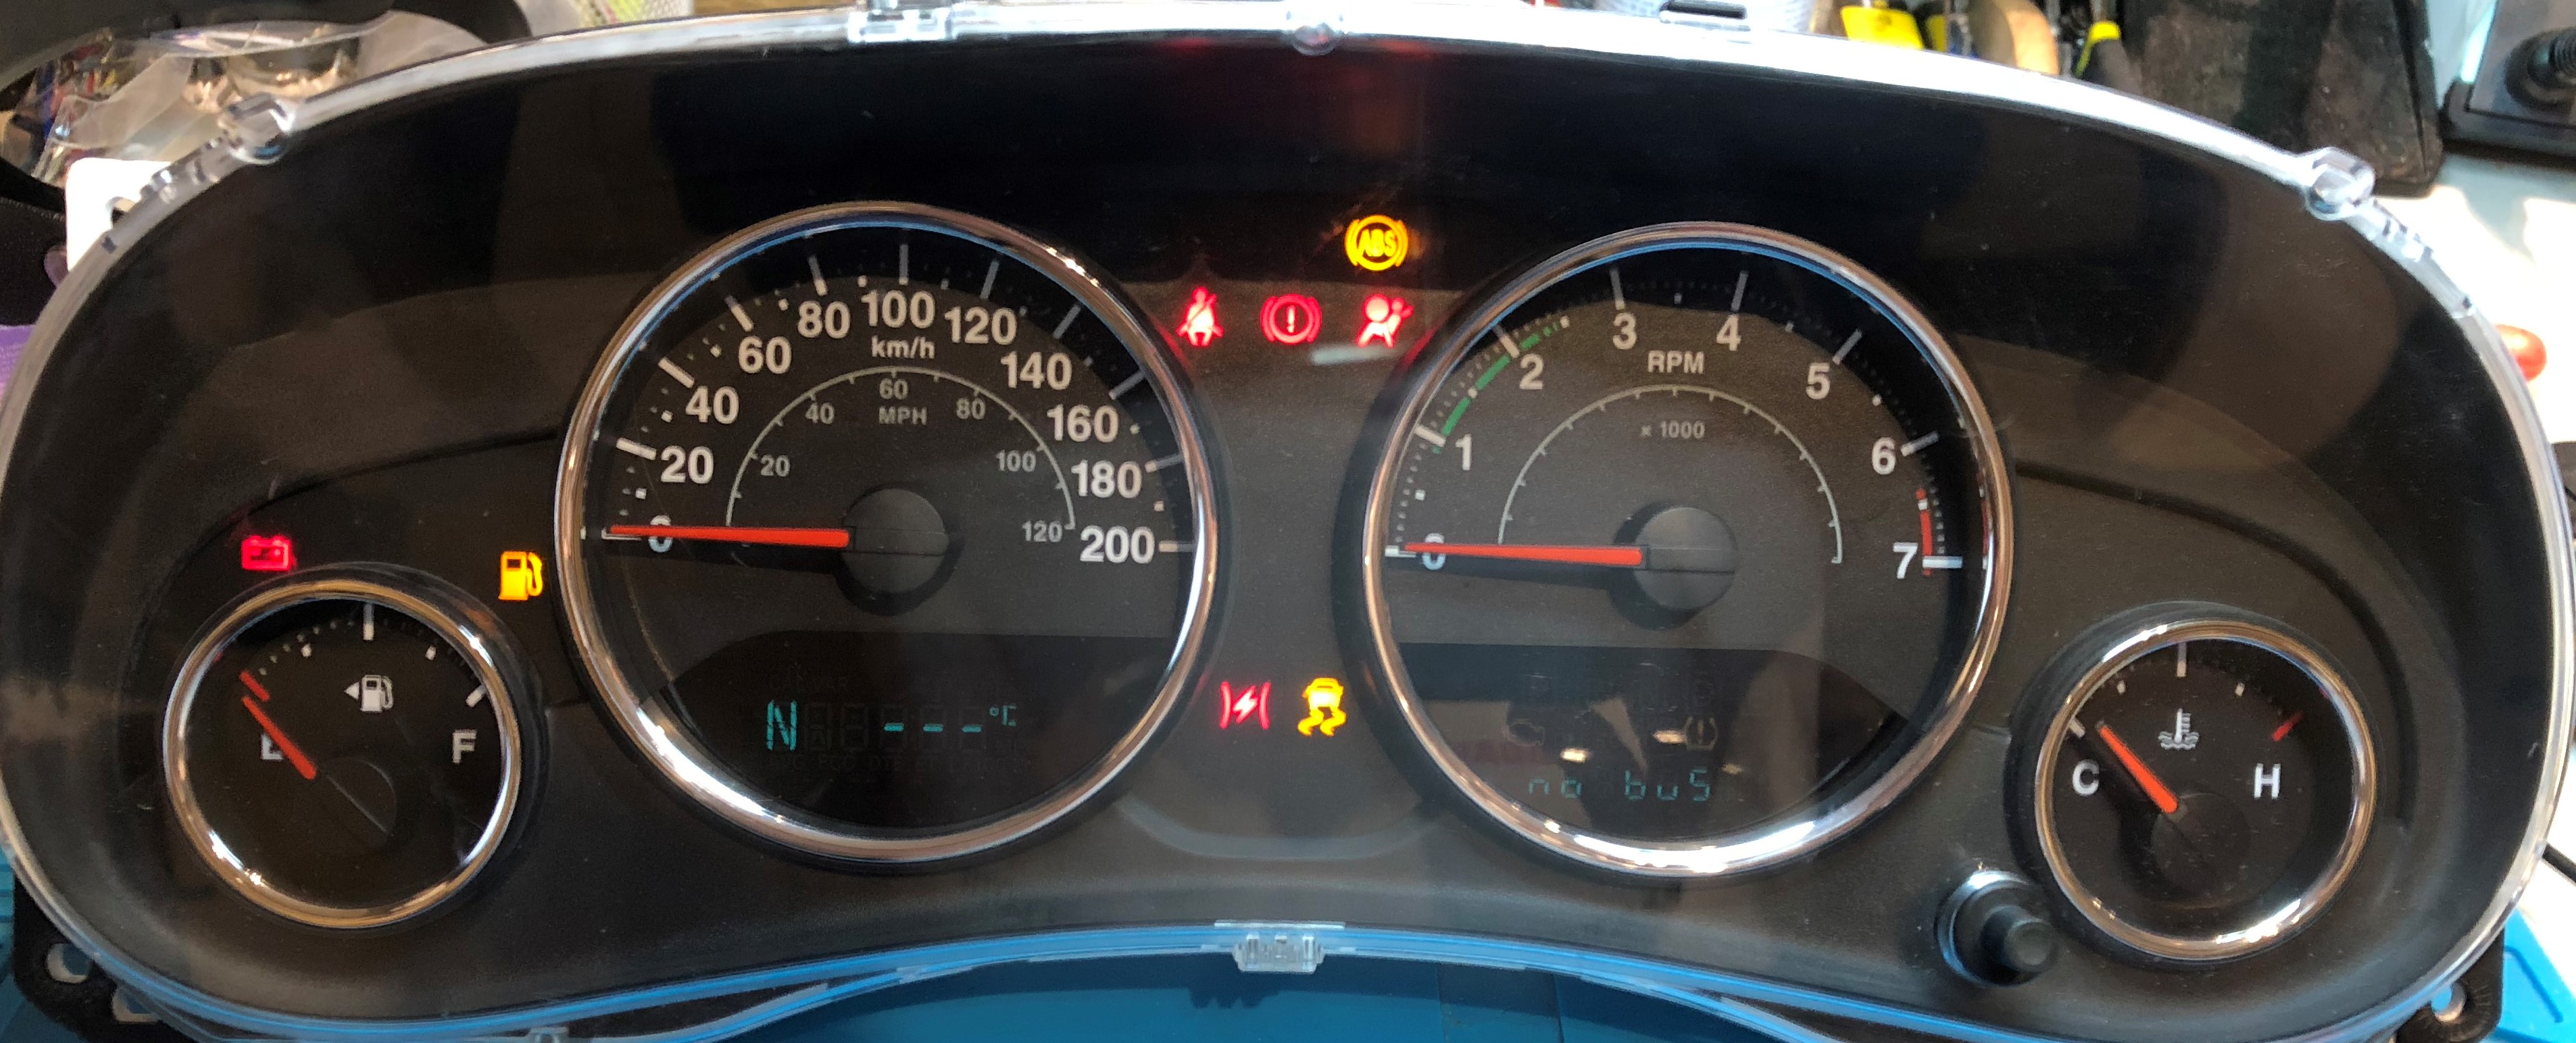 2013 JEEP WRANGLER USED DASHBOARD INSTRUMENT CLUSTER FOR SALE (MPH) - DASHBOARD  INSTRUMENT CLUSTER